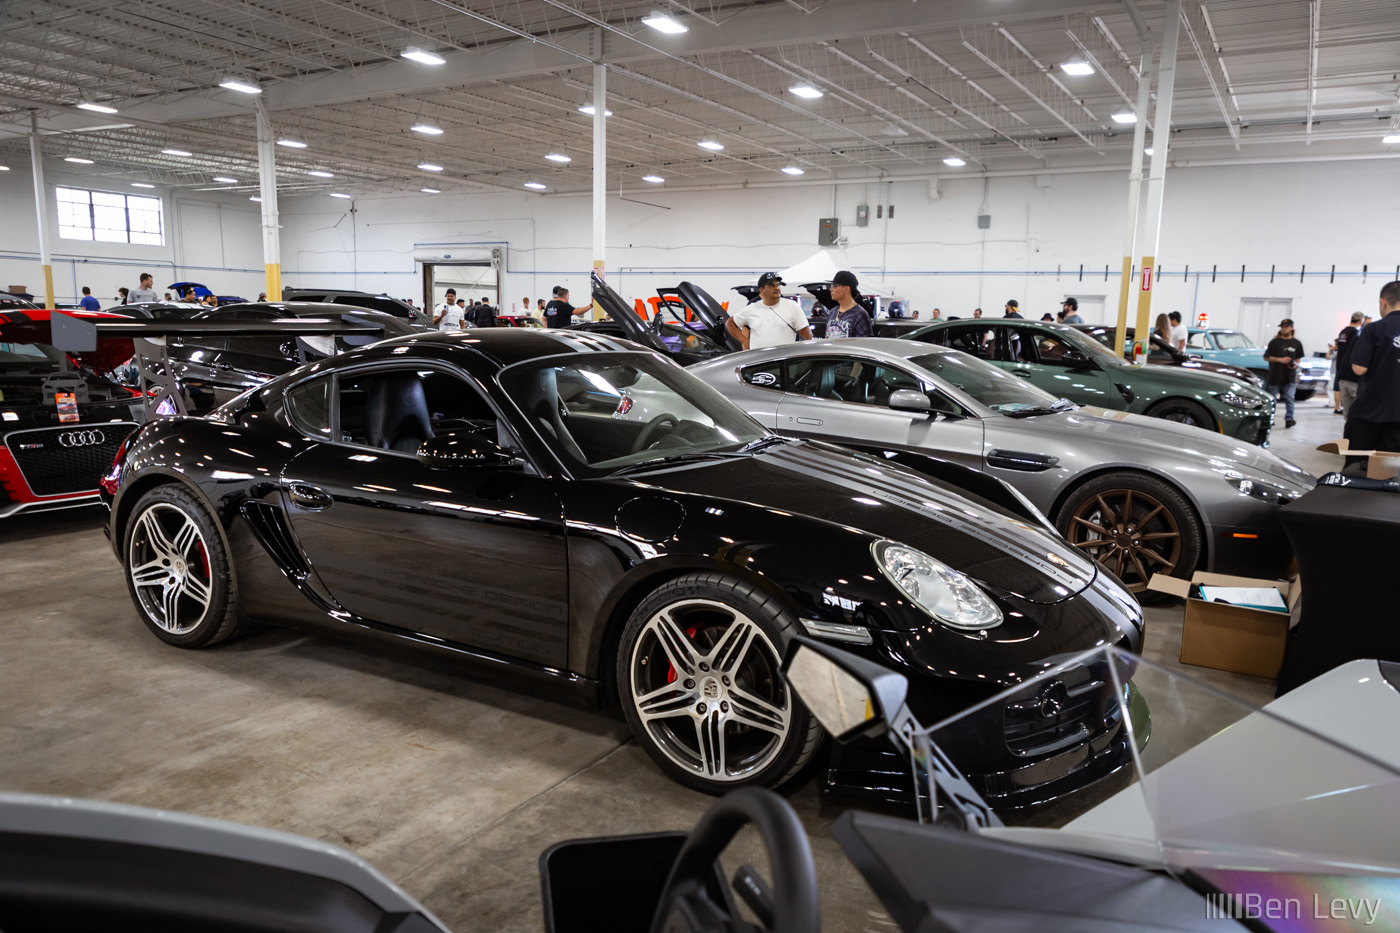 Black Porsche Cayman S at Supercars for Charity